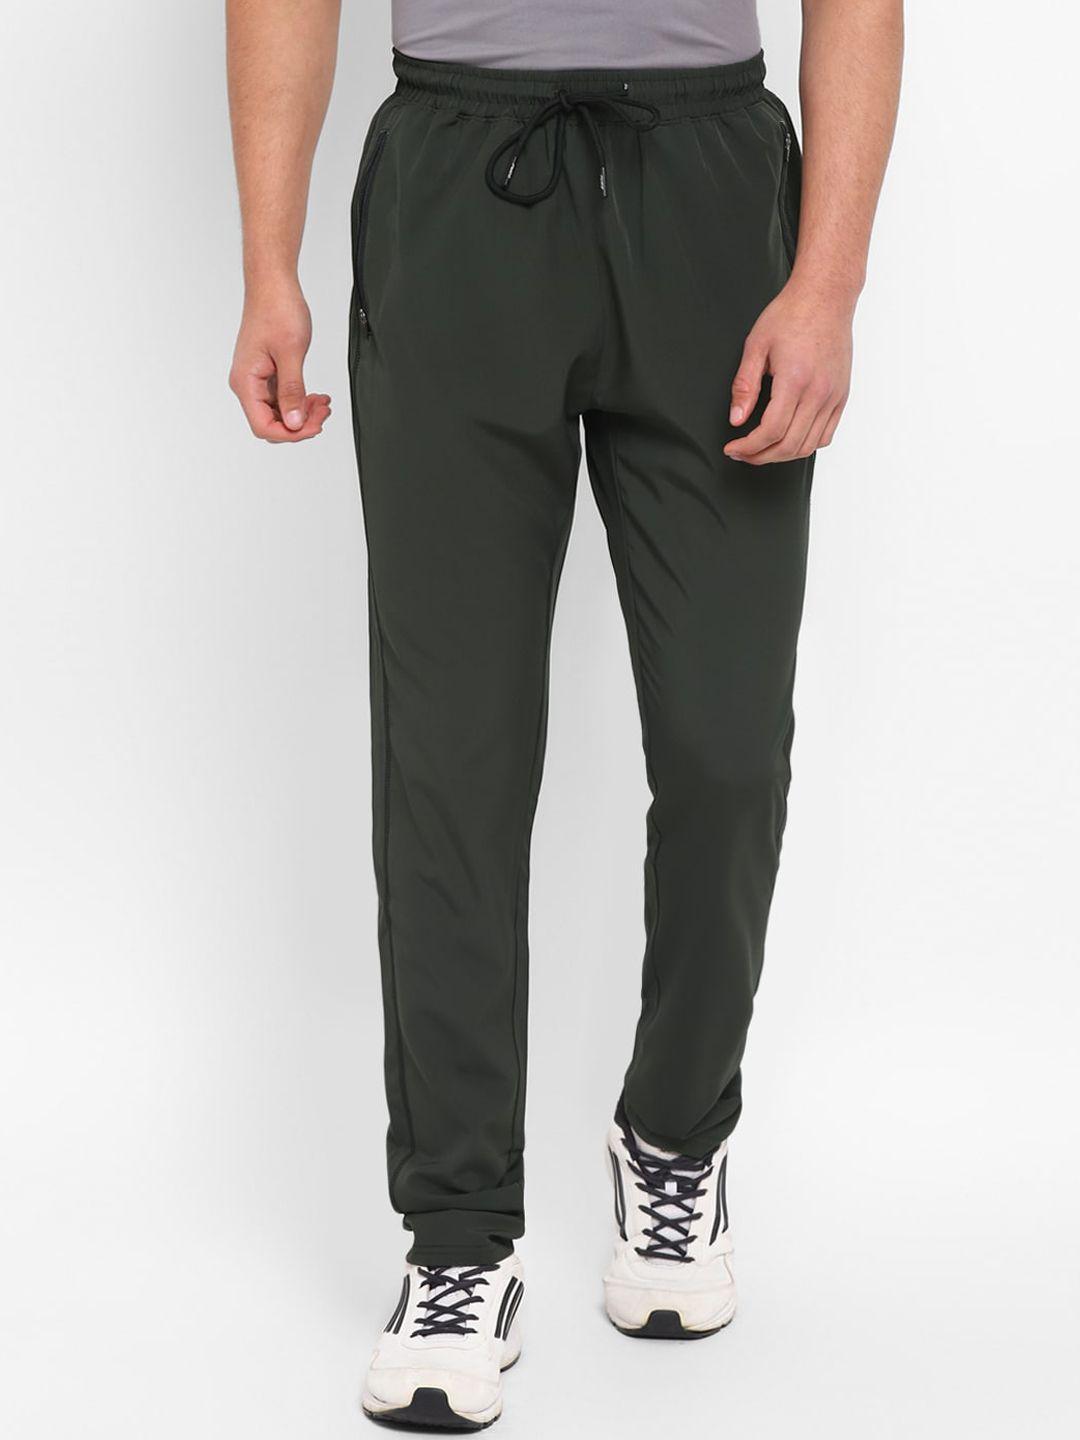 furo-by-red-chief-men-mid-rise-track-pant